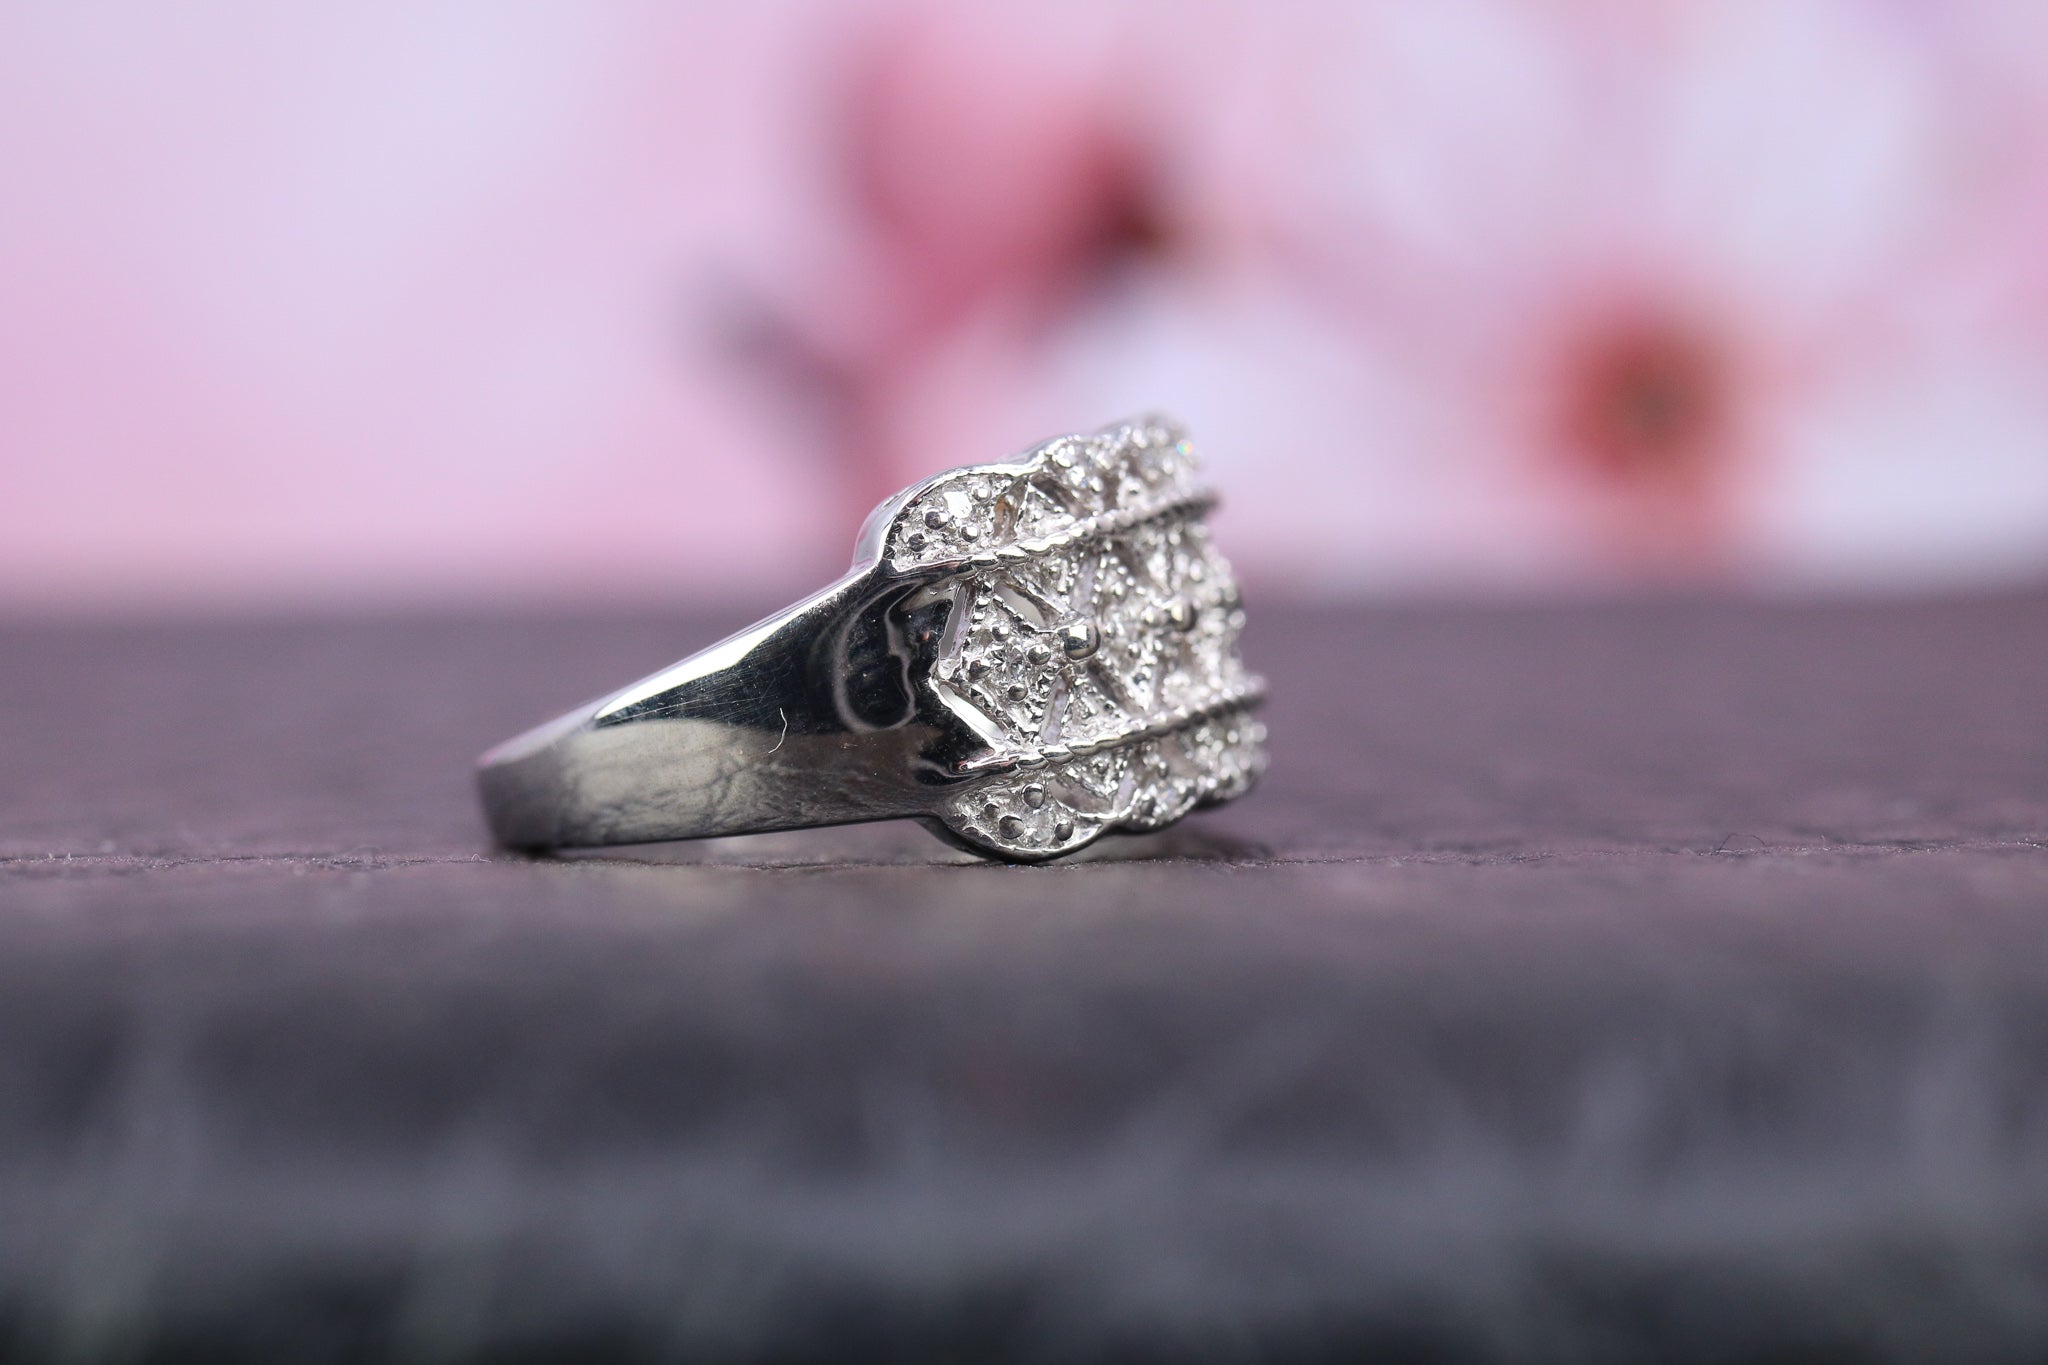 9ct White Gold & Diamond Ring - HJ2665 - Hallmark Jewellers Formby & The Jewellers Bench Widnes